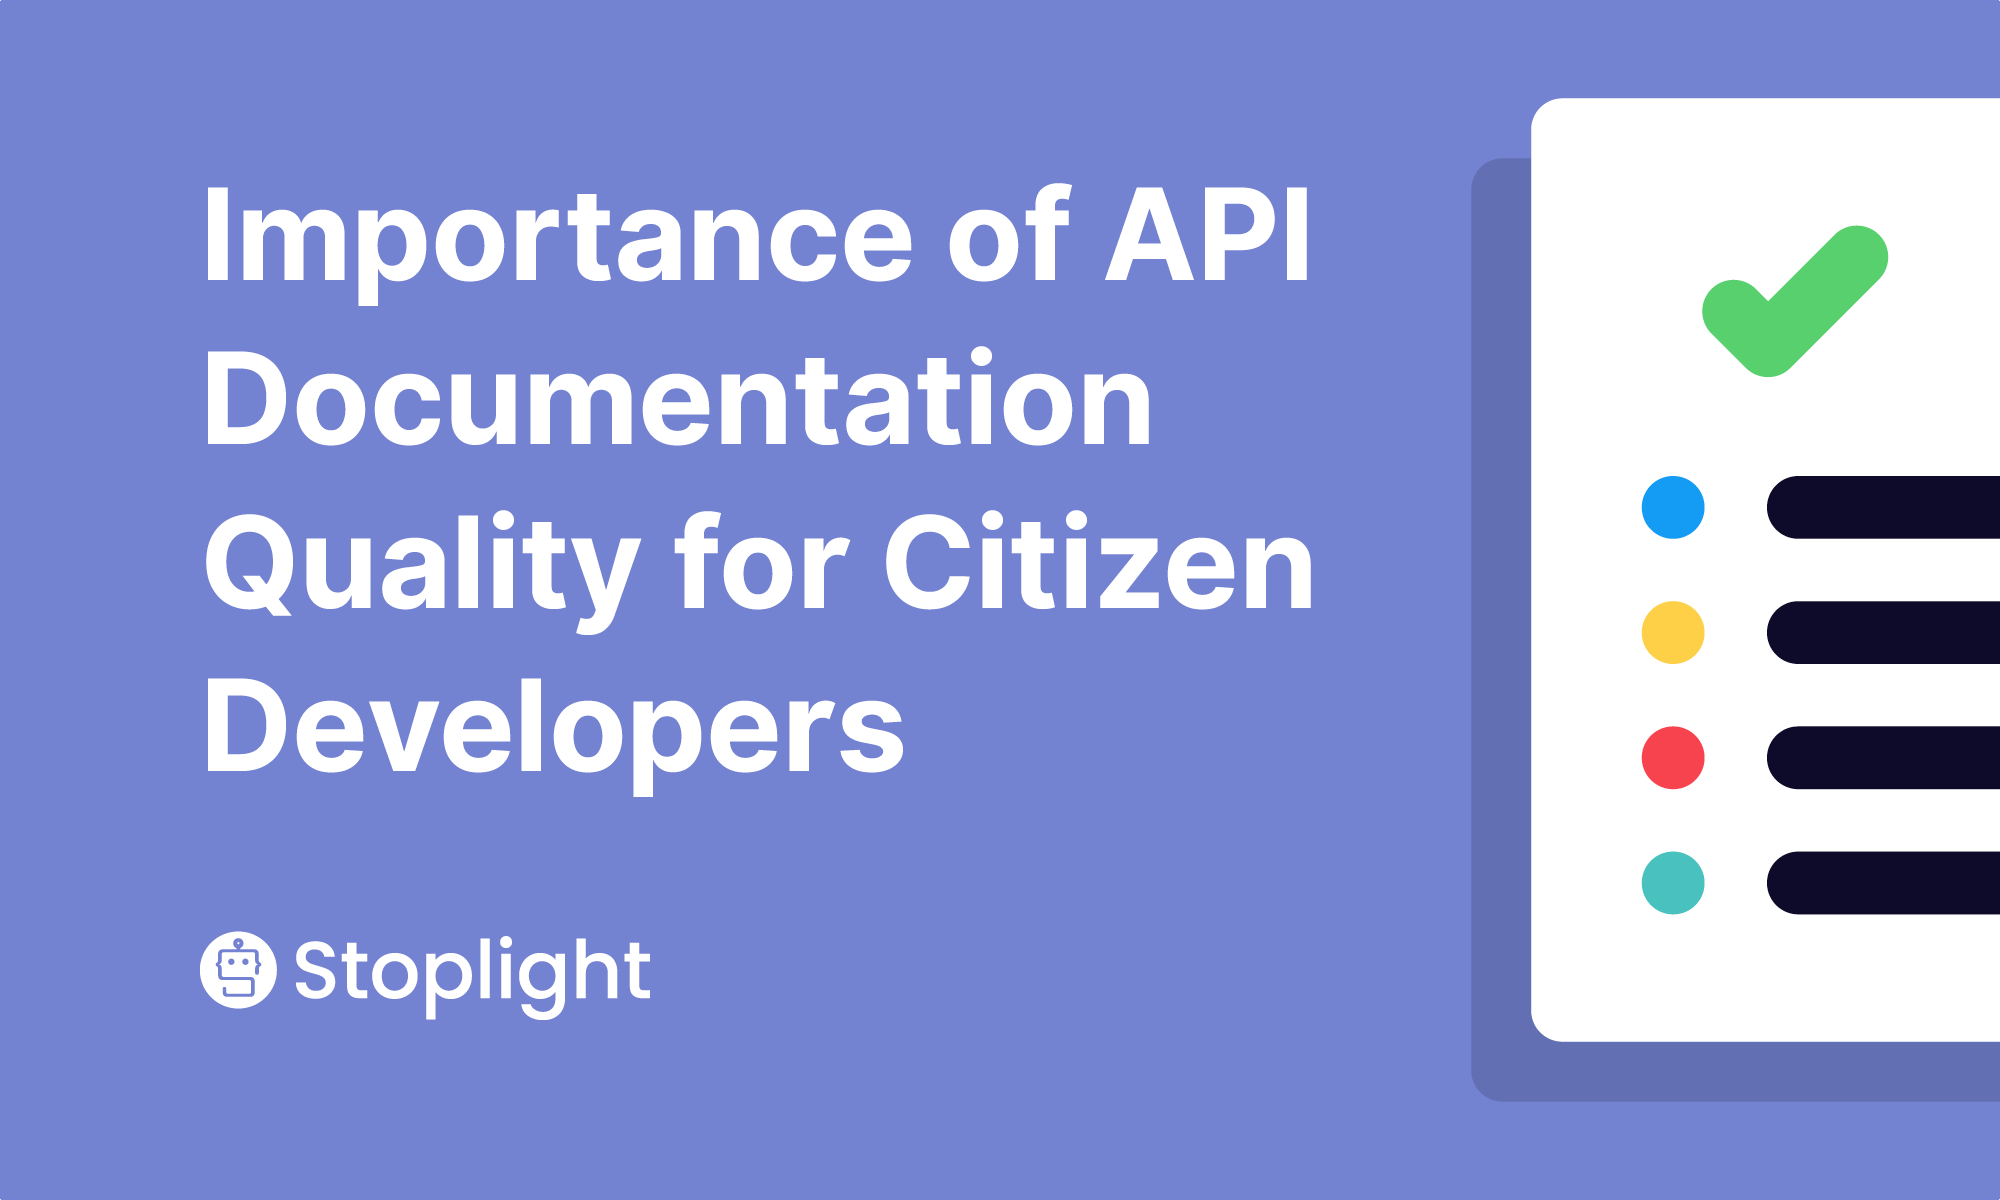 Importance of API Documentation Quality for Citizen Developers